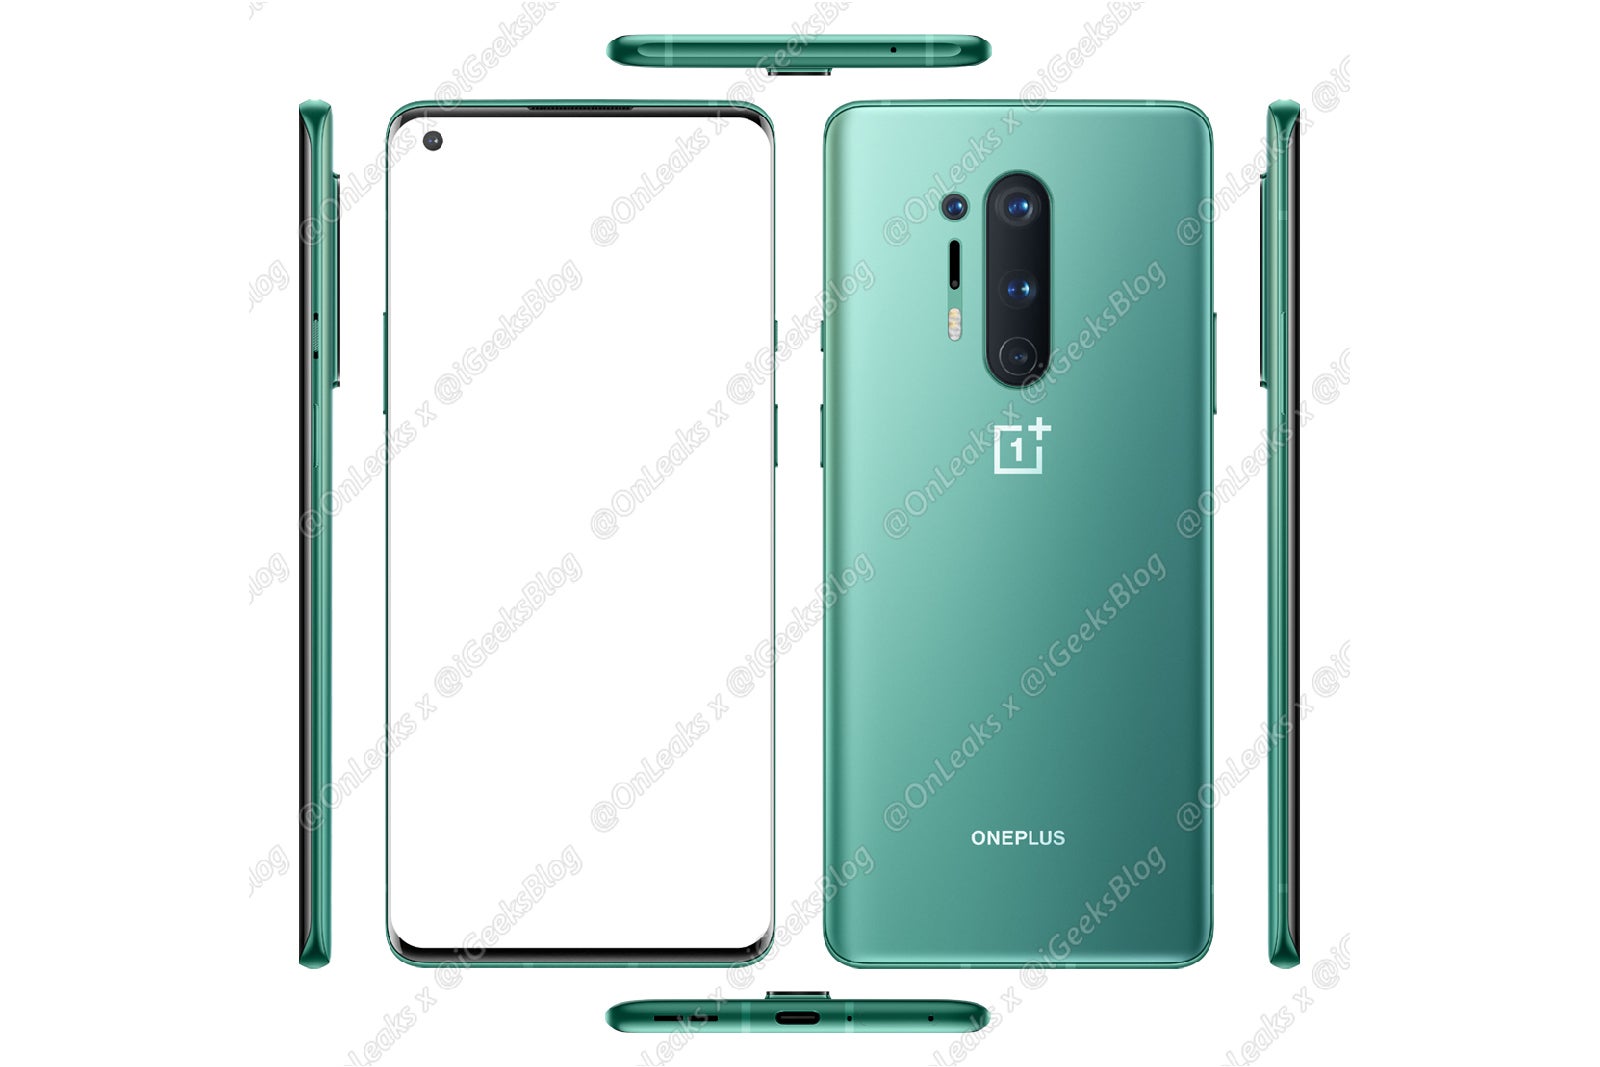 The OnePlus 8 Pro - OnePlus CEO confirms key OnePlus 8 series specs ahead of launch